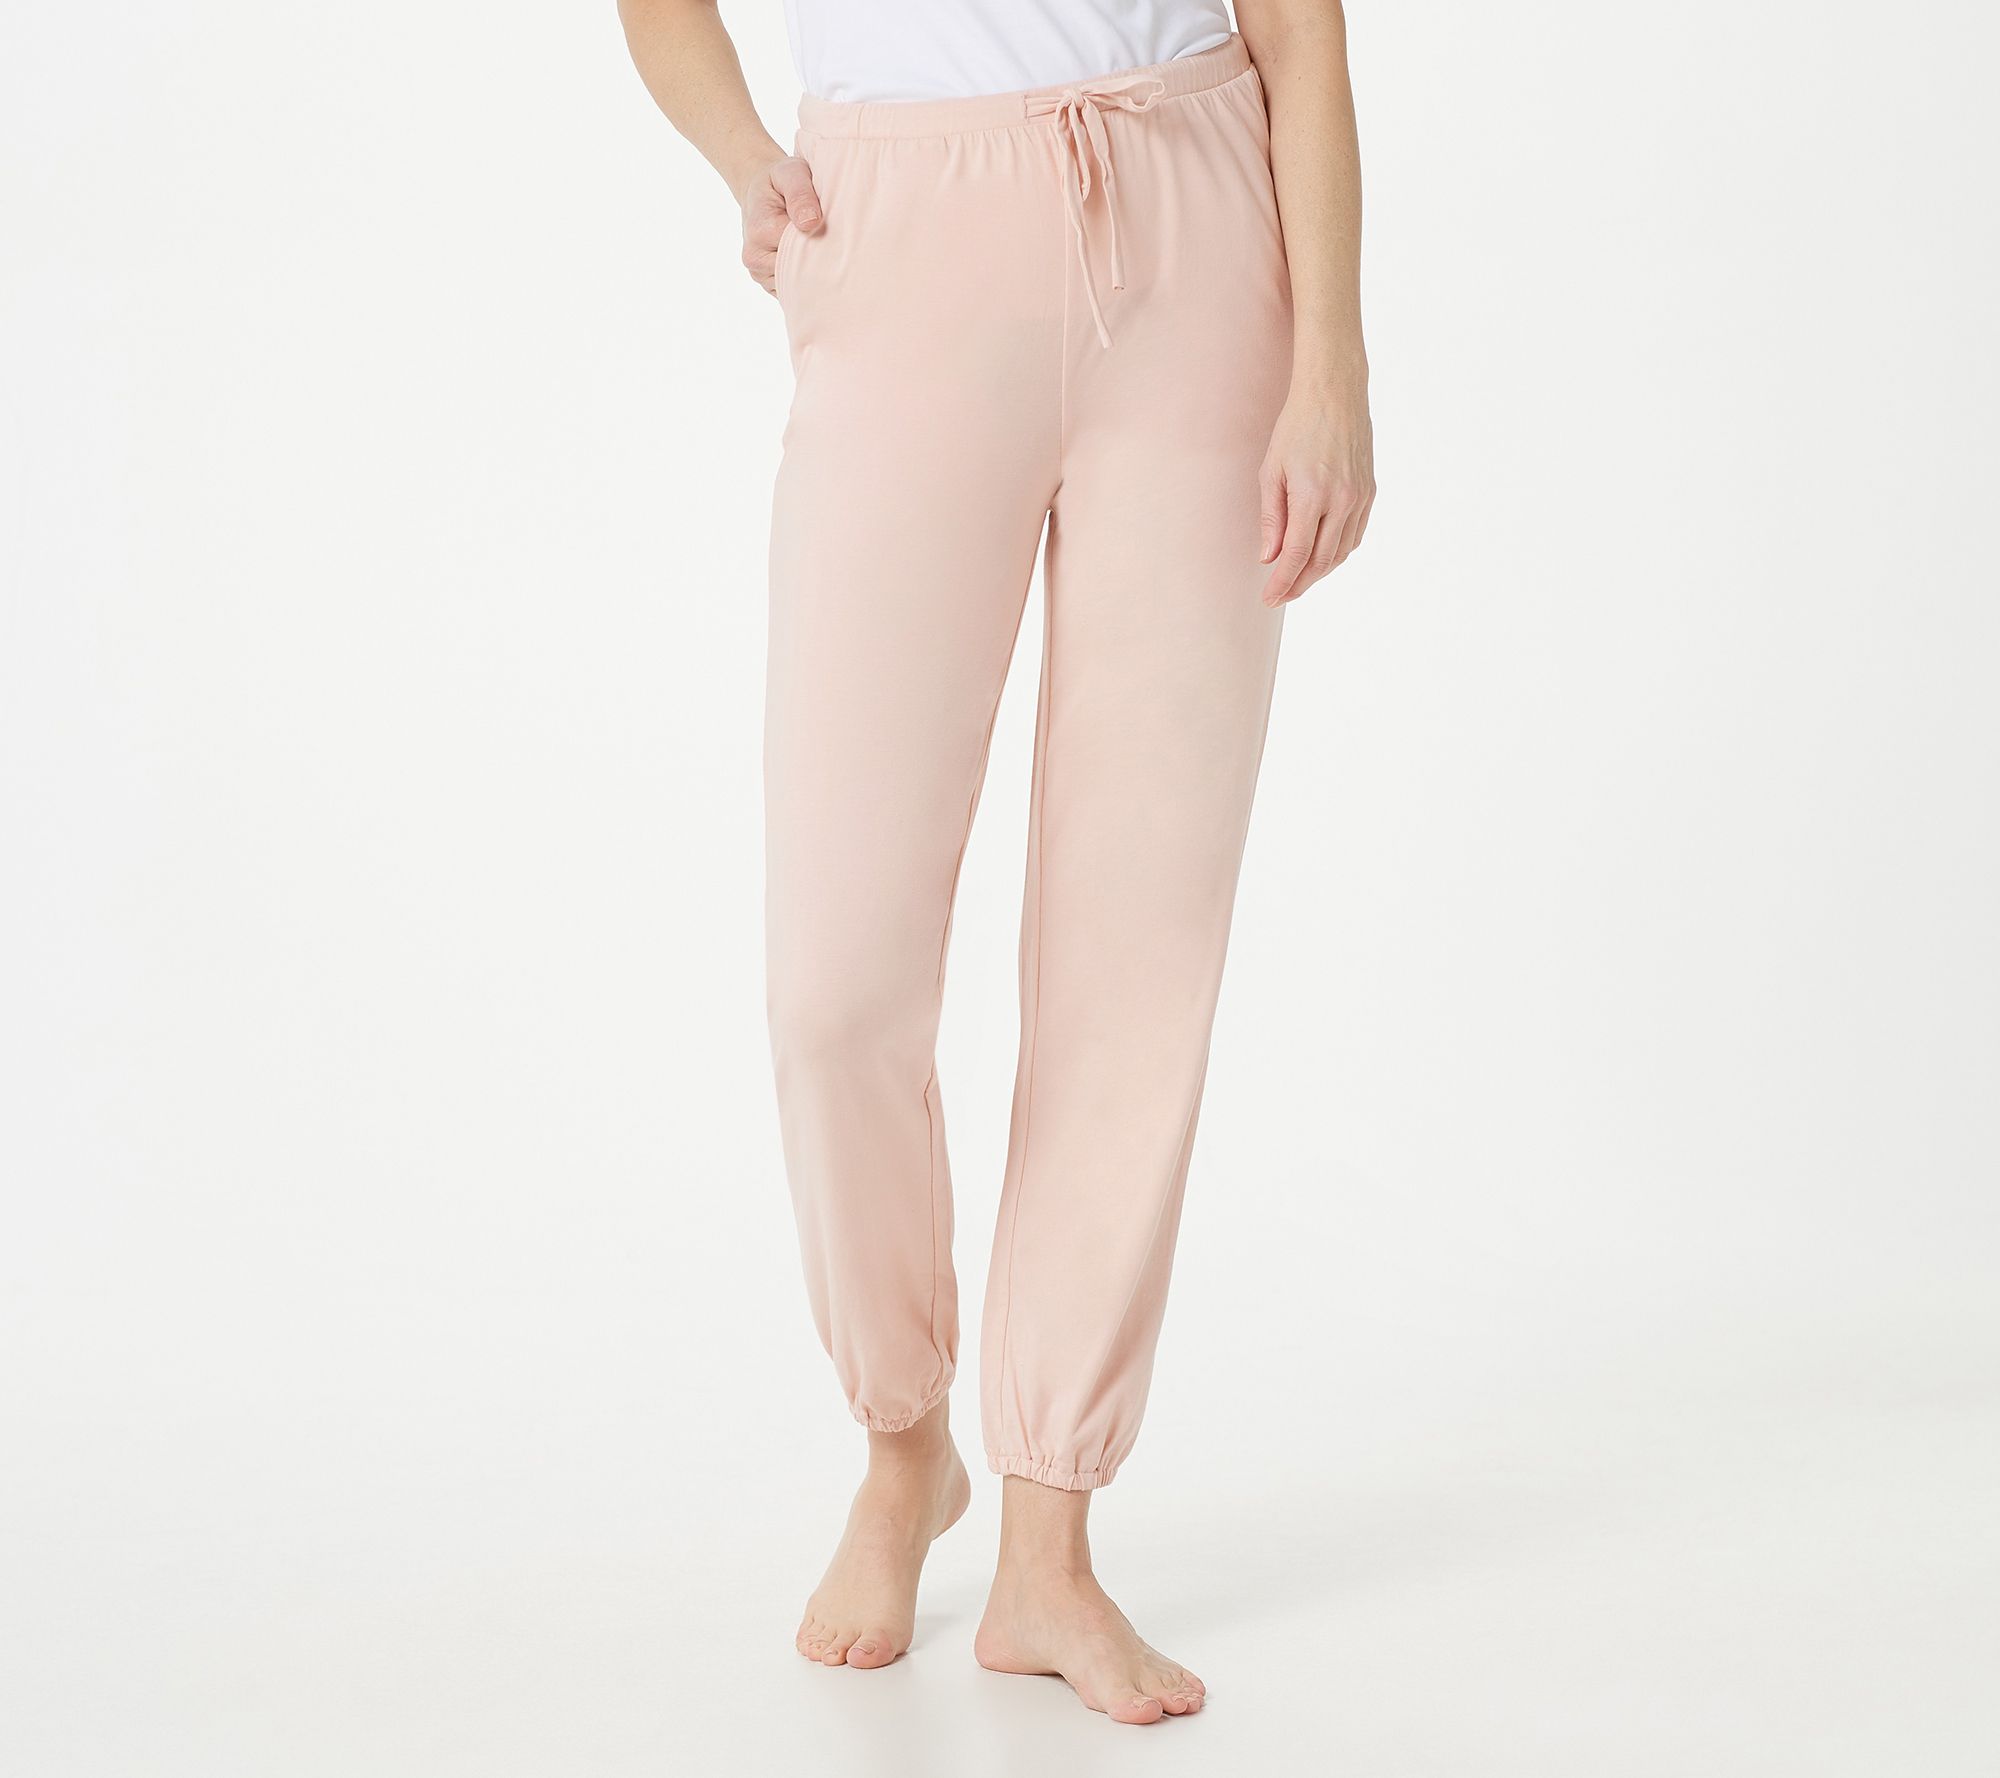 AnyBody Cozy Knit Luxe Pant with Drawstring Waist 